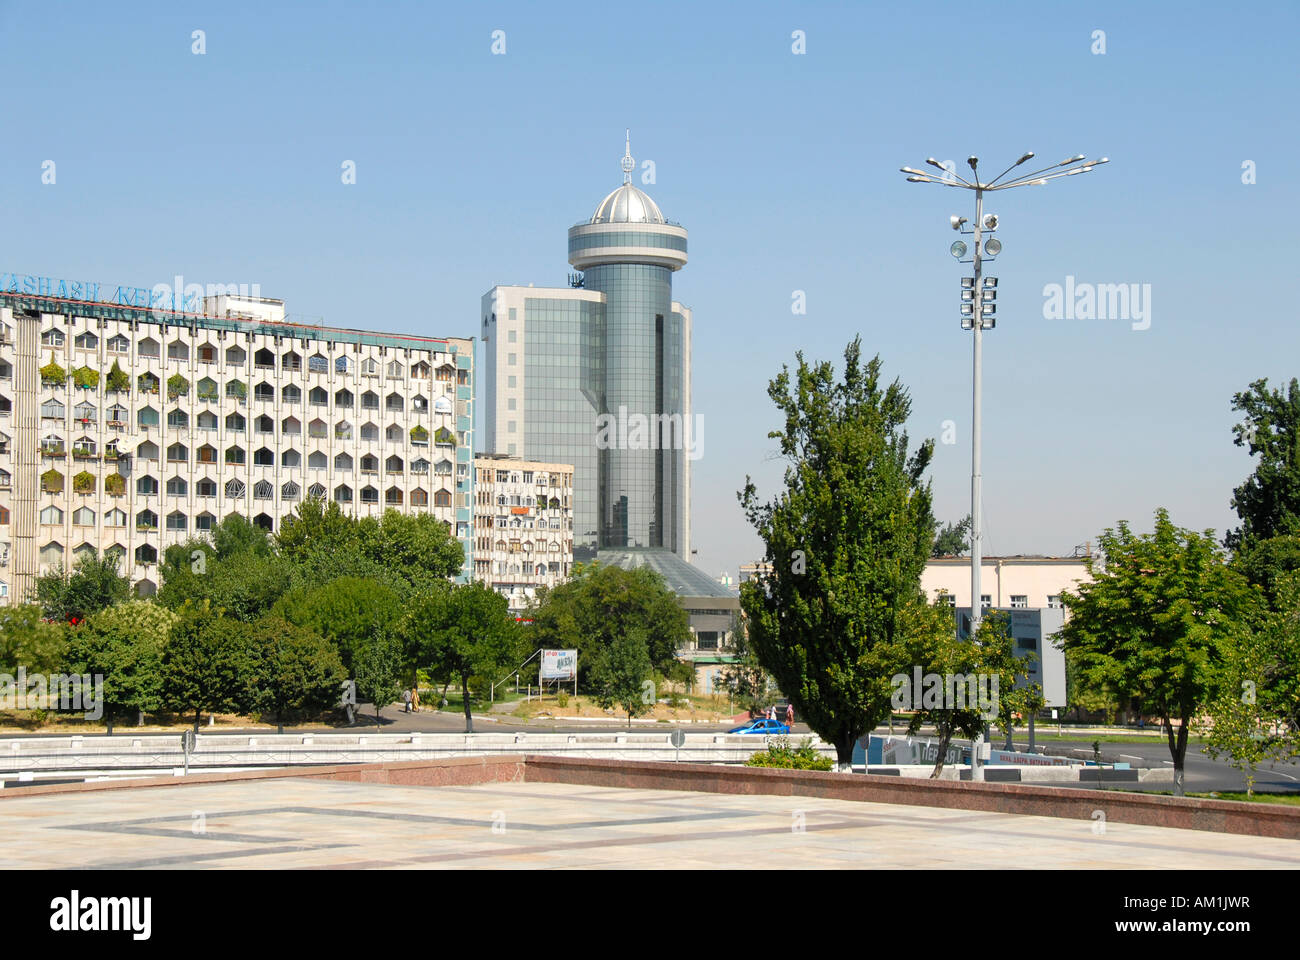 Socalistic and modern buildings at the place of friendship between nations in Tashkent Uzbekistan Stock Photo